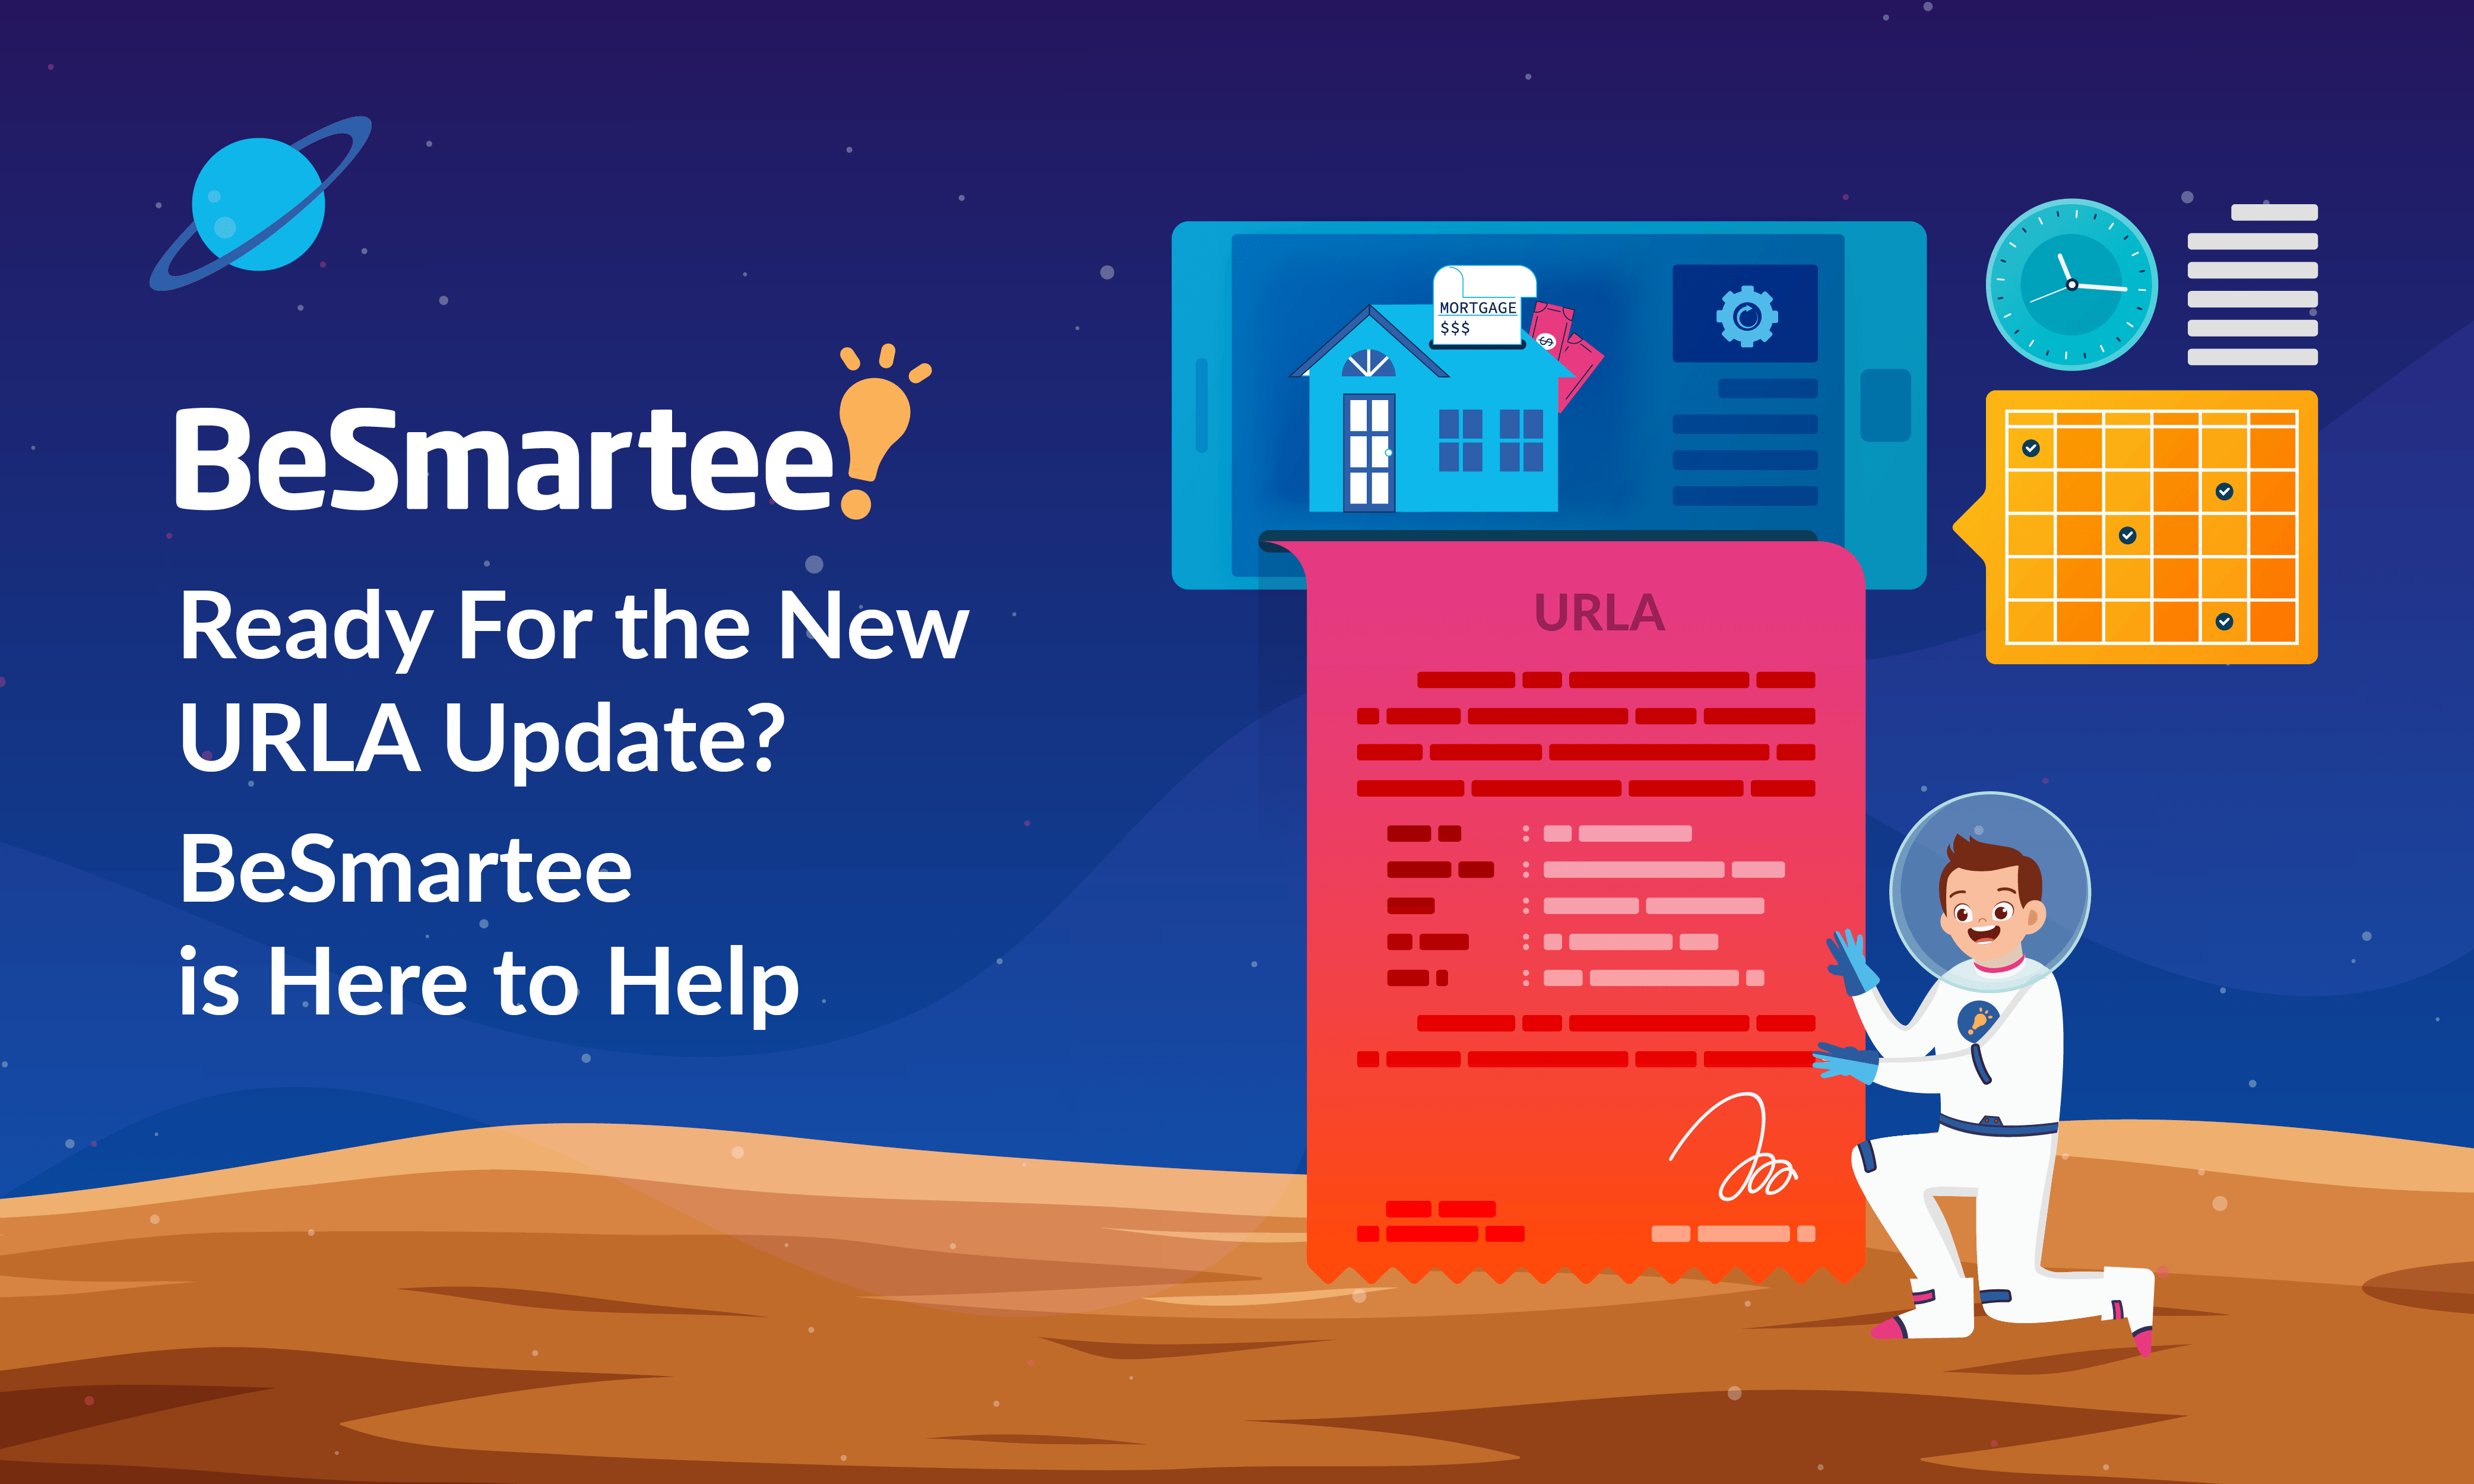 Ready For the New URLA Update? BeSmartee is Here to Help